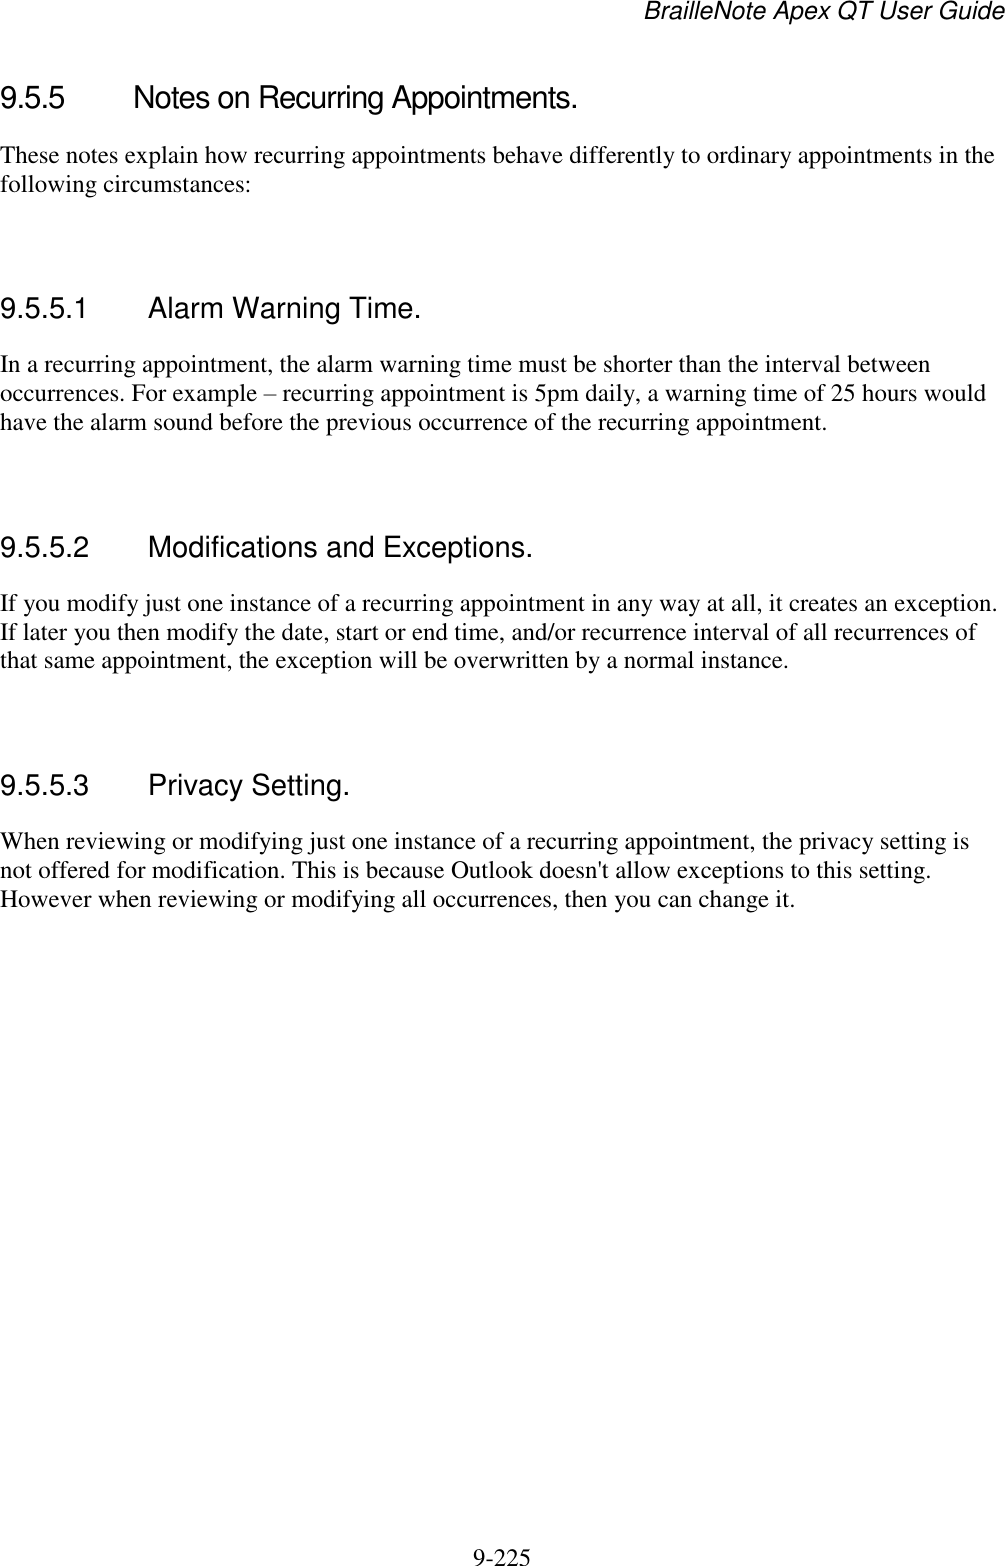 BrailleNote Apex QT User Guide  9-225   9.5.5  Notes on Recurring Appointments. These notes explain how recurring appointments behave differently to ordinary appointments in the following circumstances:   9.5.5.1  Alarm Warning Time. In a recurring appointment, the alarm warning time must be shorter than the interval between occurrences. For example – recurring appointment is 5pm daily, a warning time of 25 hours would have the alarm sound before the previous occurrence of the recurring appointment.   9.5.5.2  Modifications and Exceptions. If you modify just one instance of a recurring appointment in any way at all, it creates an exception. If later you then modify the date, start or end time, and/or recurrence interval of all recurrences of that same appointment, the exception will be overwritten by a normal instance.   9.5.5.3  Privacy Setting. When reviewing or modifying just one instance of a recurring appointment, the privacy setting is not offered for modification. This is because Outlook doesn&apos;t allow exceptions to this setting. However when reviewing or modifying all occurrences, then you can change it.   